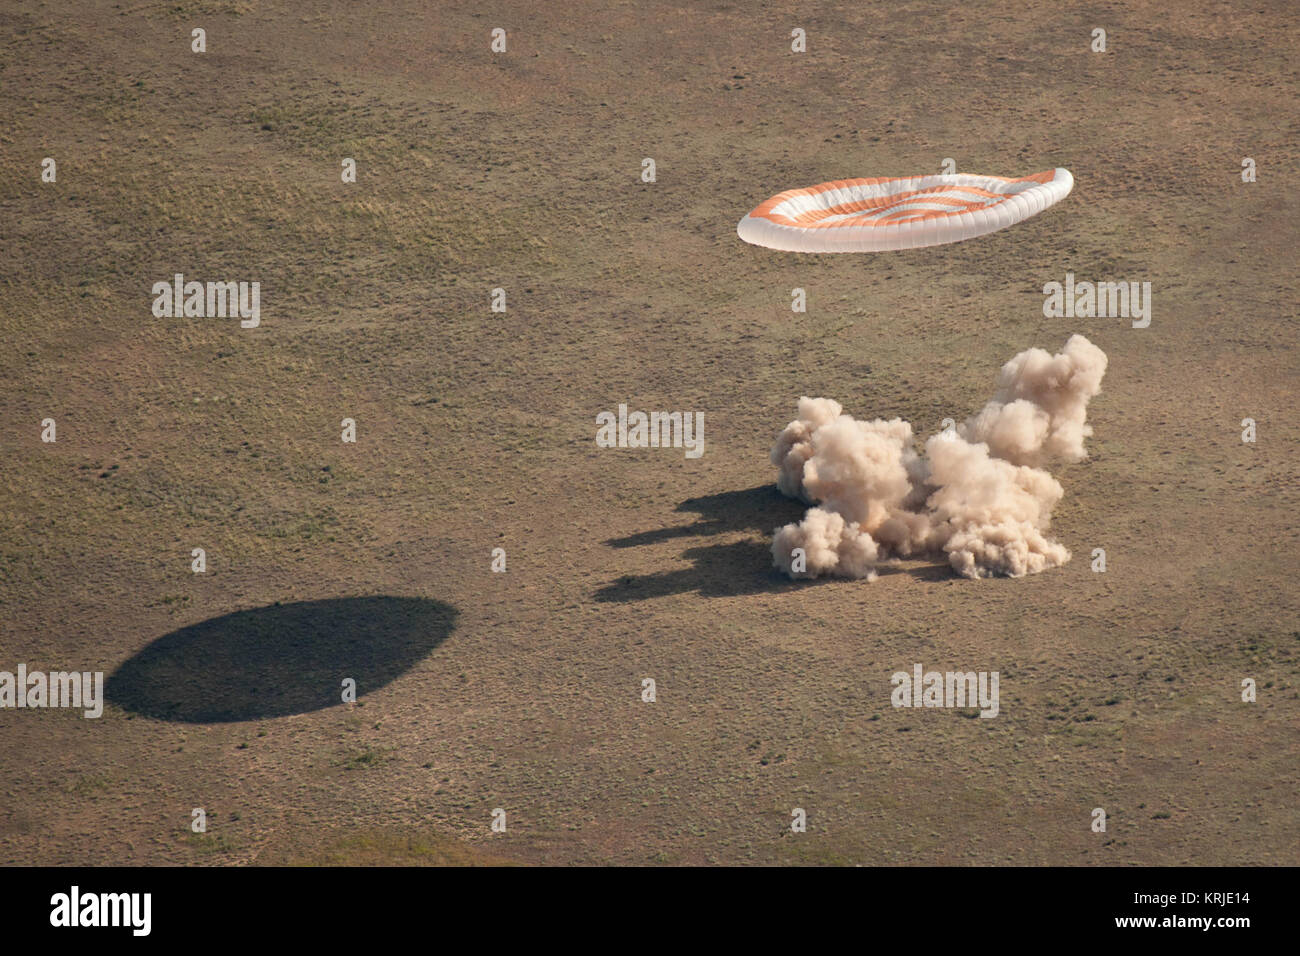 The Soyuz TMA-20 spacecraft is seen as it lands with Expedition 27 Commander Dmitry Kondratyev and Flight Engineers Paolo Nespoli and Cady Coleman in a remote area southeast of the town of Zhezkazgan, Kazakhstan, on Tuesday, May 24, 2011.   NASA Astronaut Coleman, Russian Cosmonaut Kondratyev and Italian Astronaut Nespoli are returning from more than five months onboard the International Space Station where they served as members of the Expedition 26 and 27 crews. Photo Credit: (NASA/Bill Ingalls) Soyuz TMA-20 capsule touches down Stock Photo